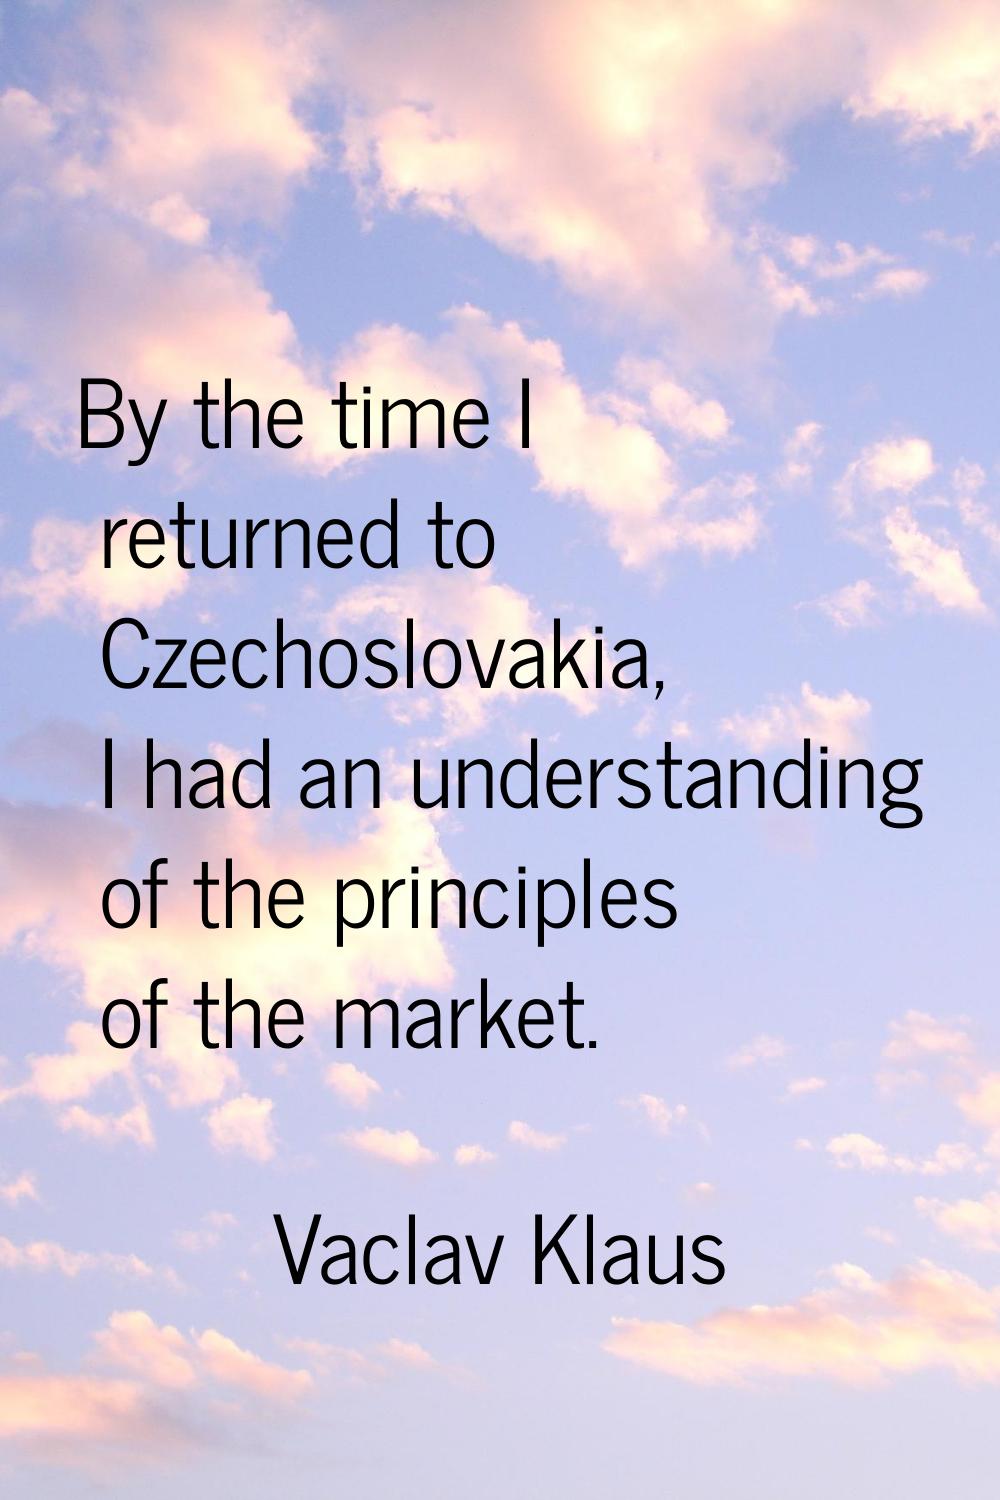 By the time I returned to Czechoslovakia, I had an understanding of the principles of the market.